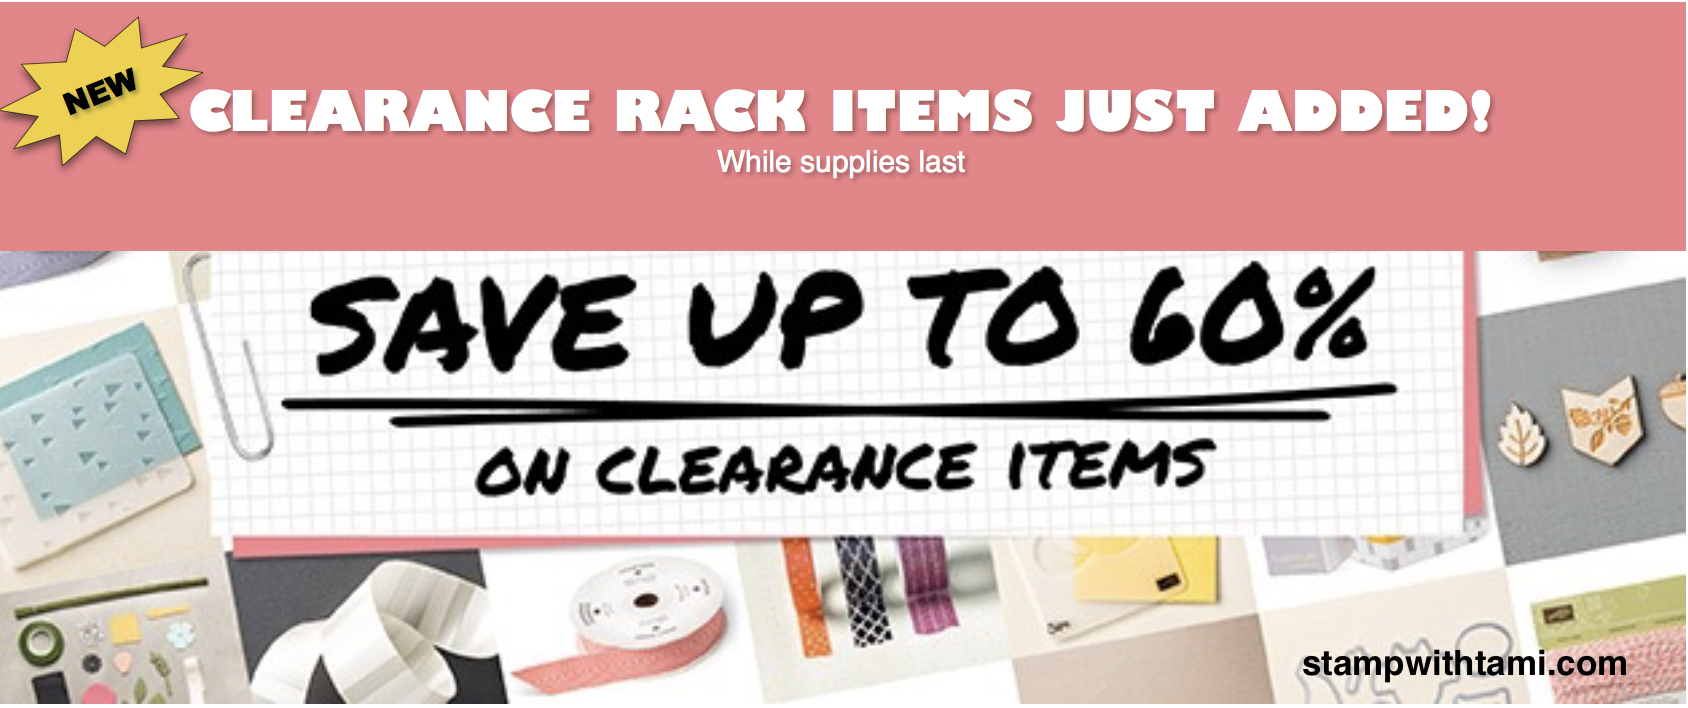 stampin-up-clearance-rack-sale